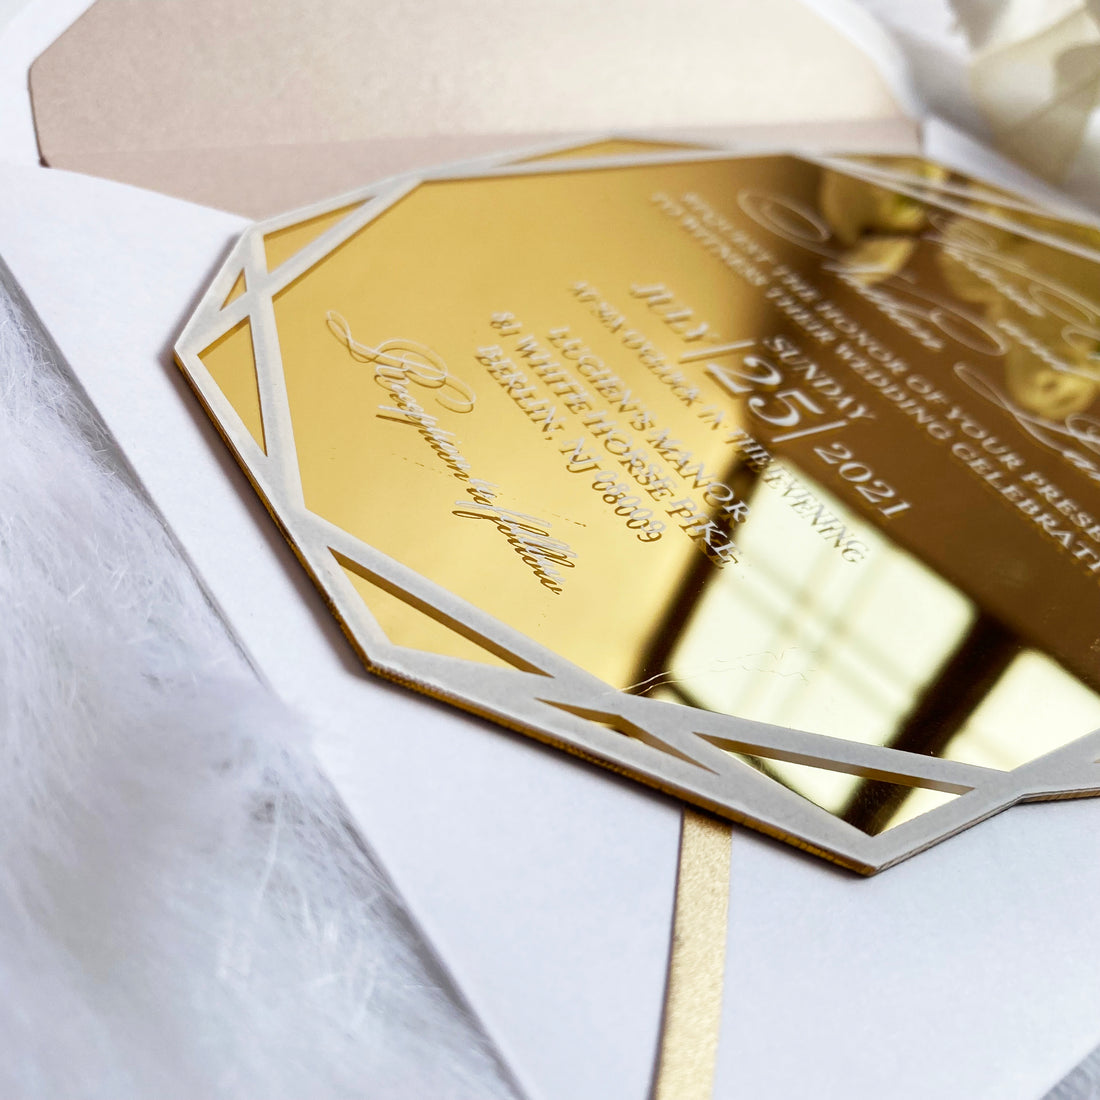 Glamorous White & Nude Gold Mirror Invitation with White Ink YWI-7017